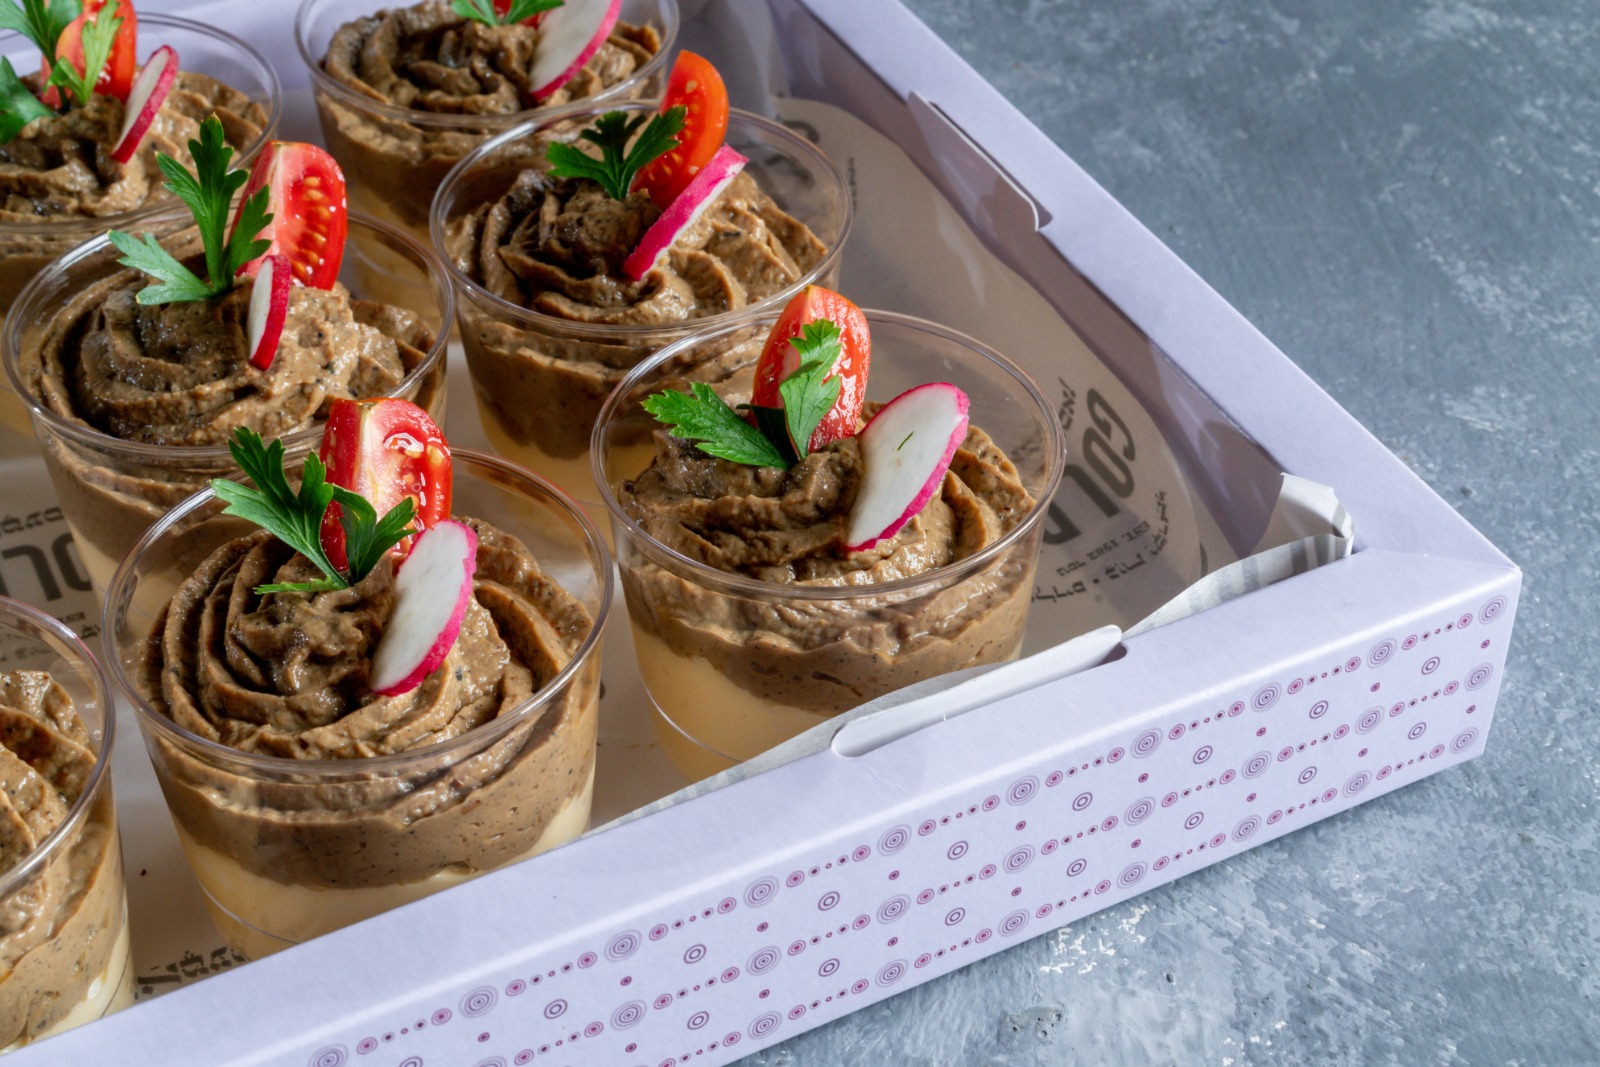 A tray of egg mousse salad and chopped liver in cups